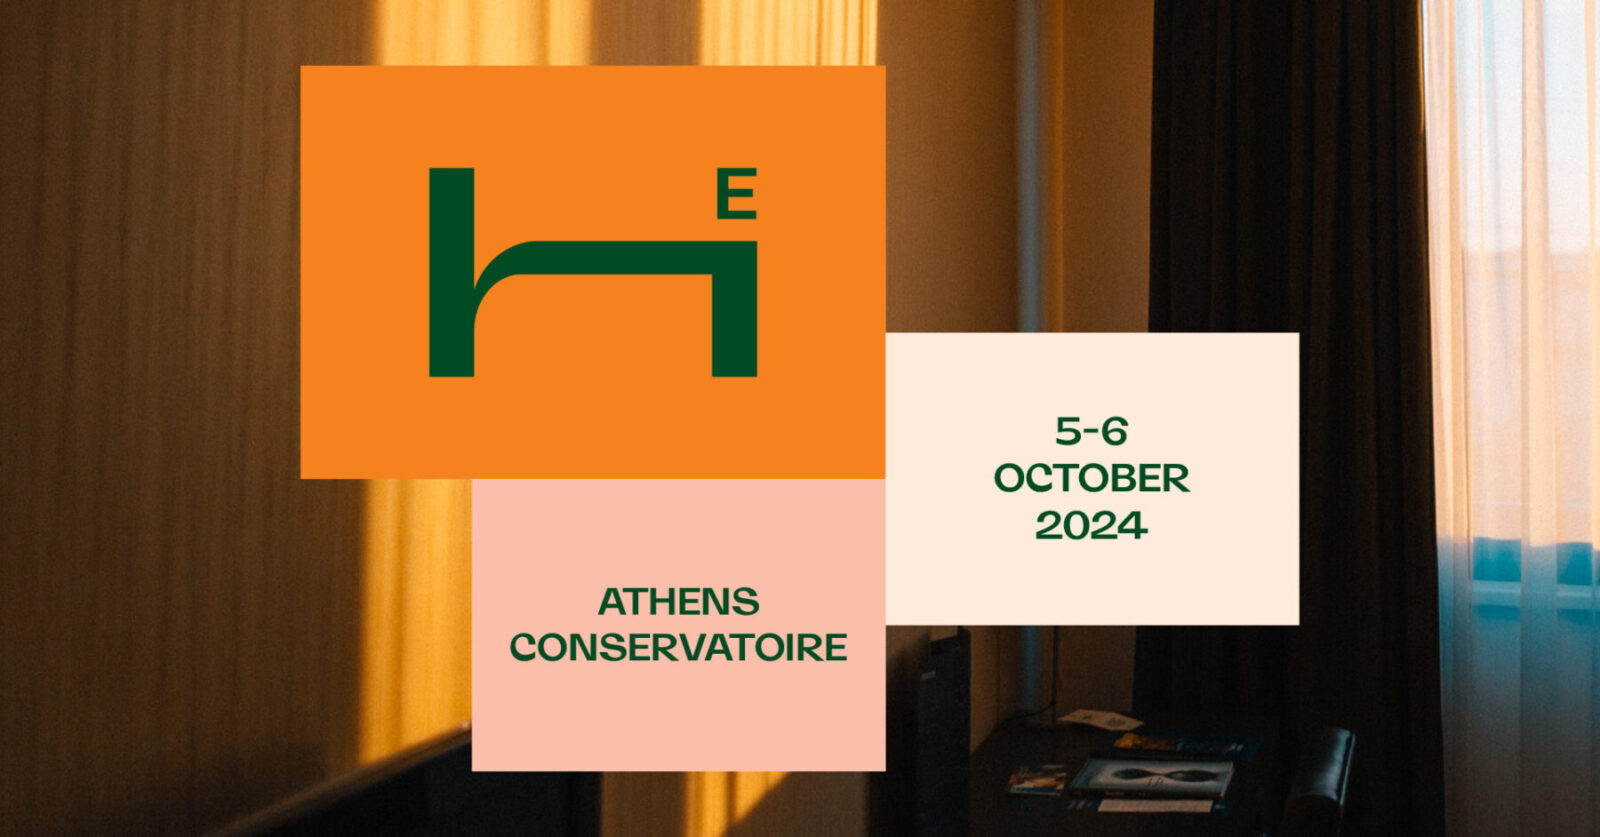 Archisearch HOTEL EXPERIENCE | SAVE THE DATE 5 & 6 OCTOBER 2024